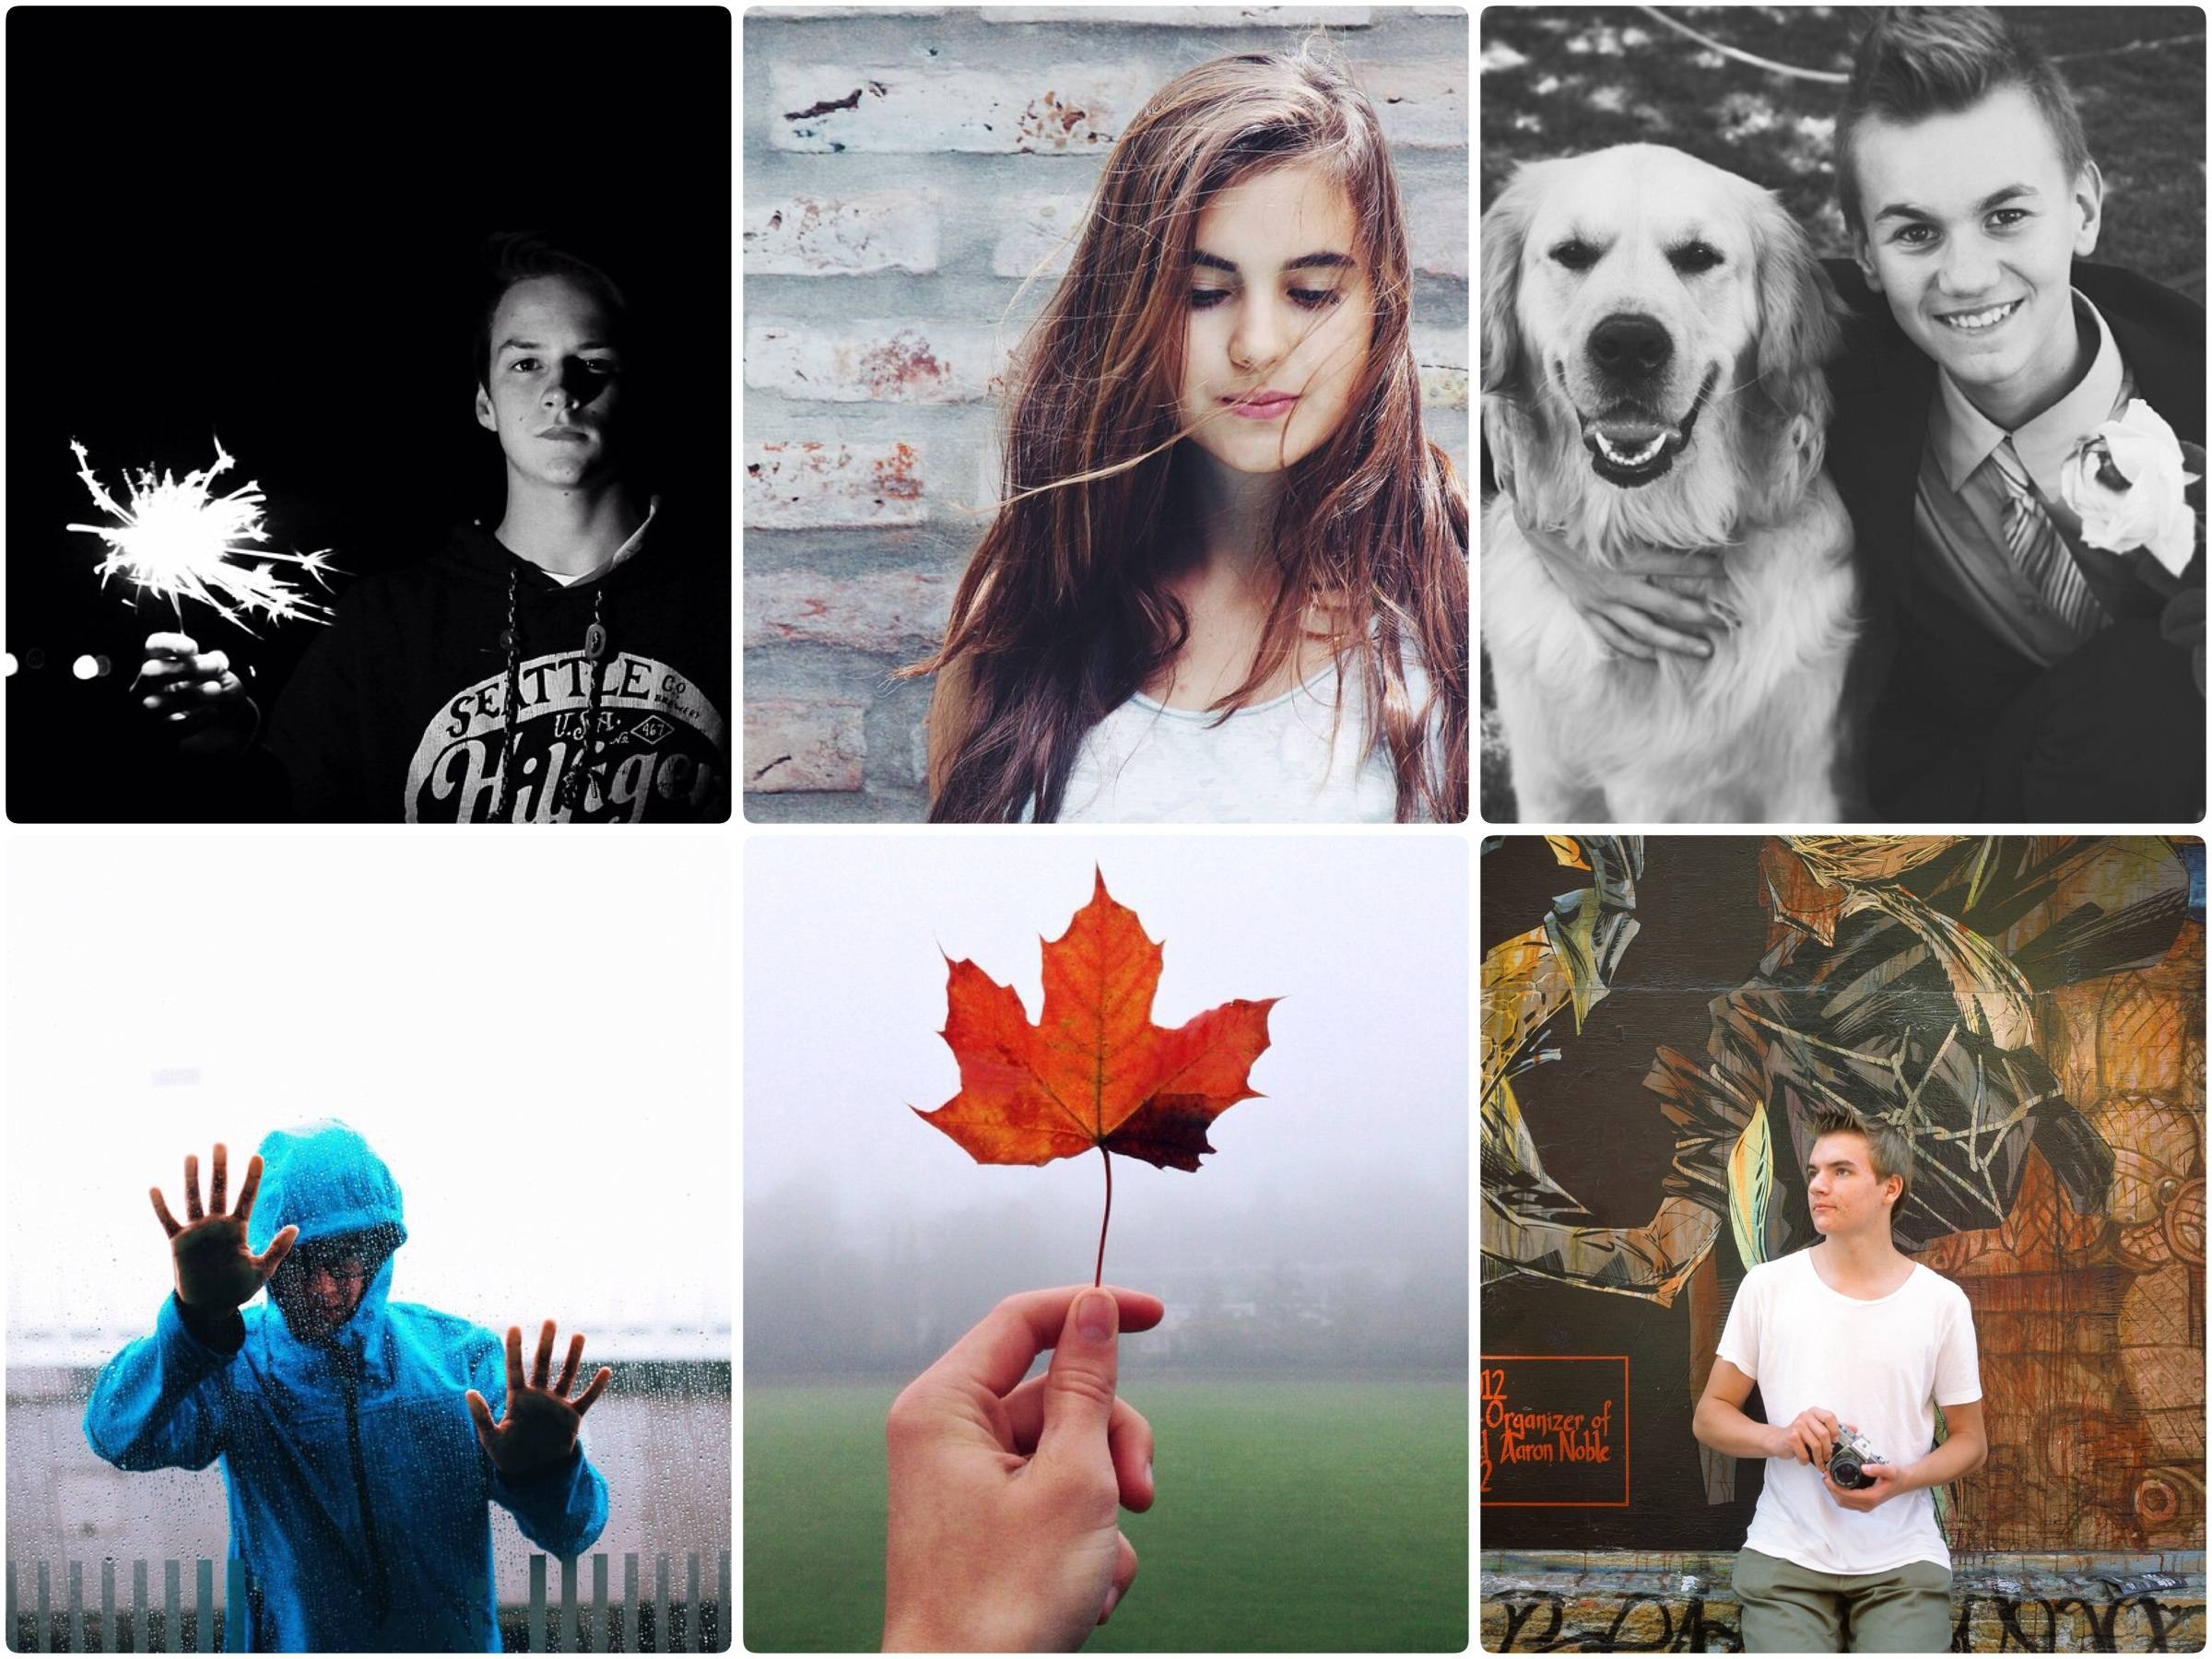 True talent has no age limit: Meet six gifted shooters 16 and under on Instagram.